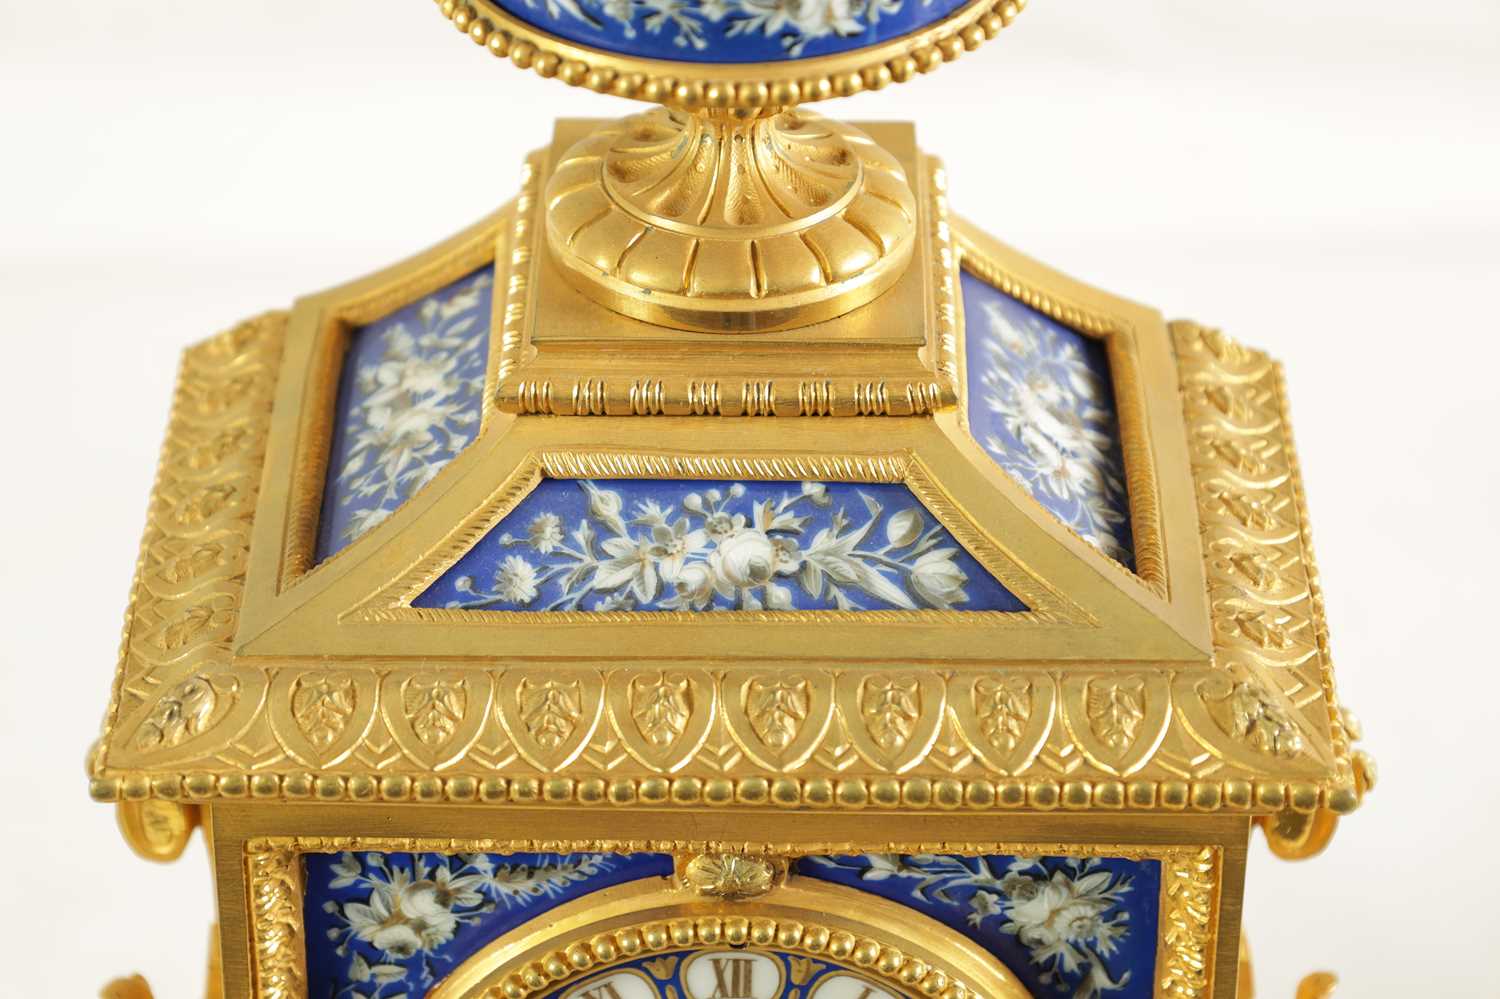 A LATE 19TH CENTURY FRENCH ORMOLU AND PORCELAIN PANELLED MANTEL CLOCK - Image 4 of 9